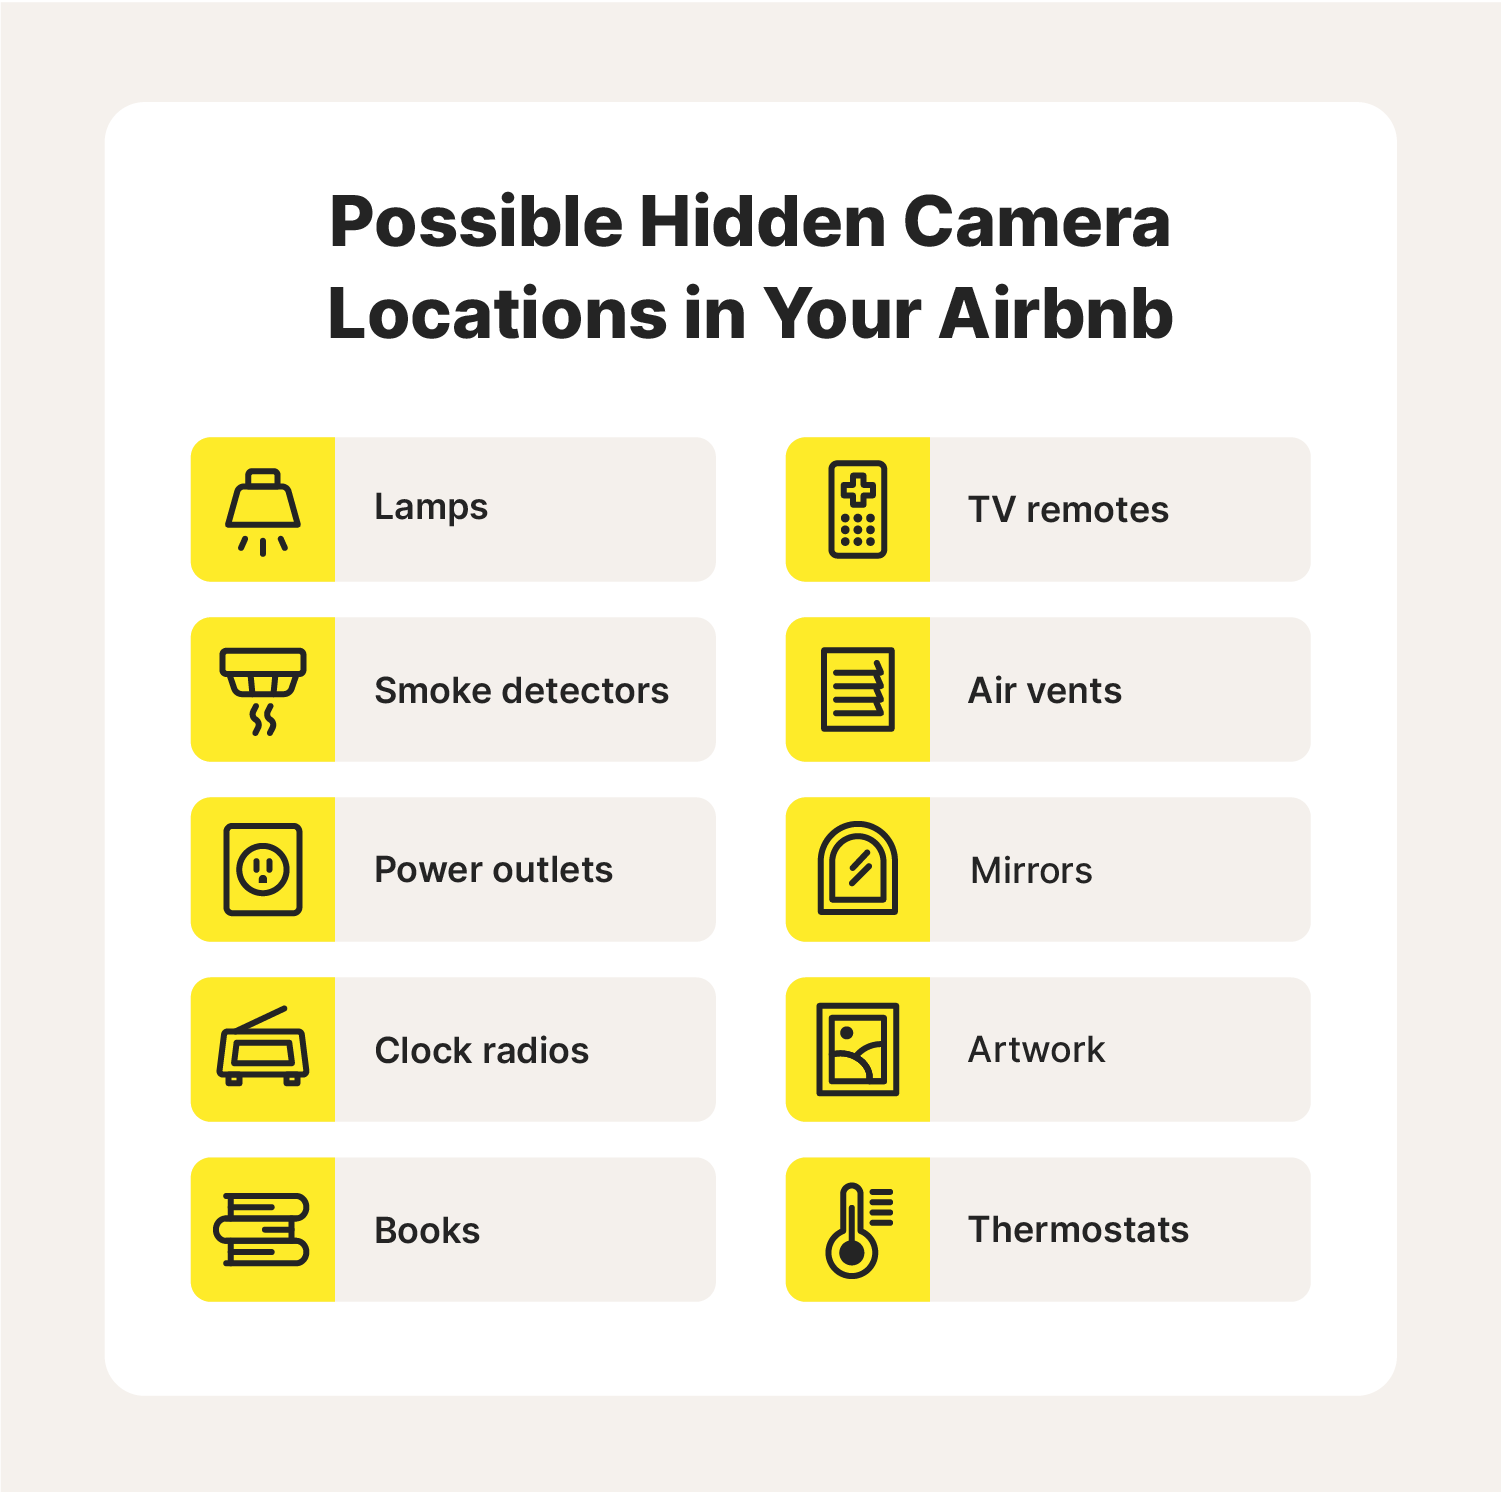 A graphic showcases a list of 10 potential locations where cameras may be hidden during an Airbnb scam.